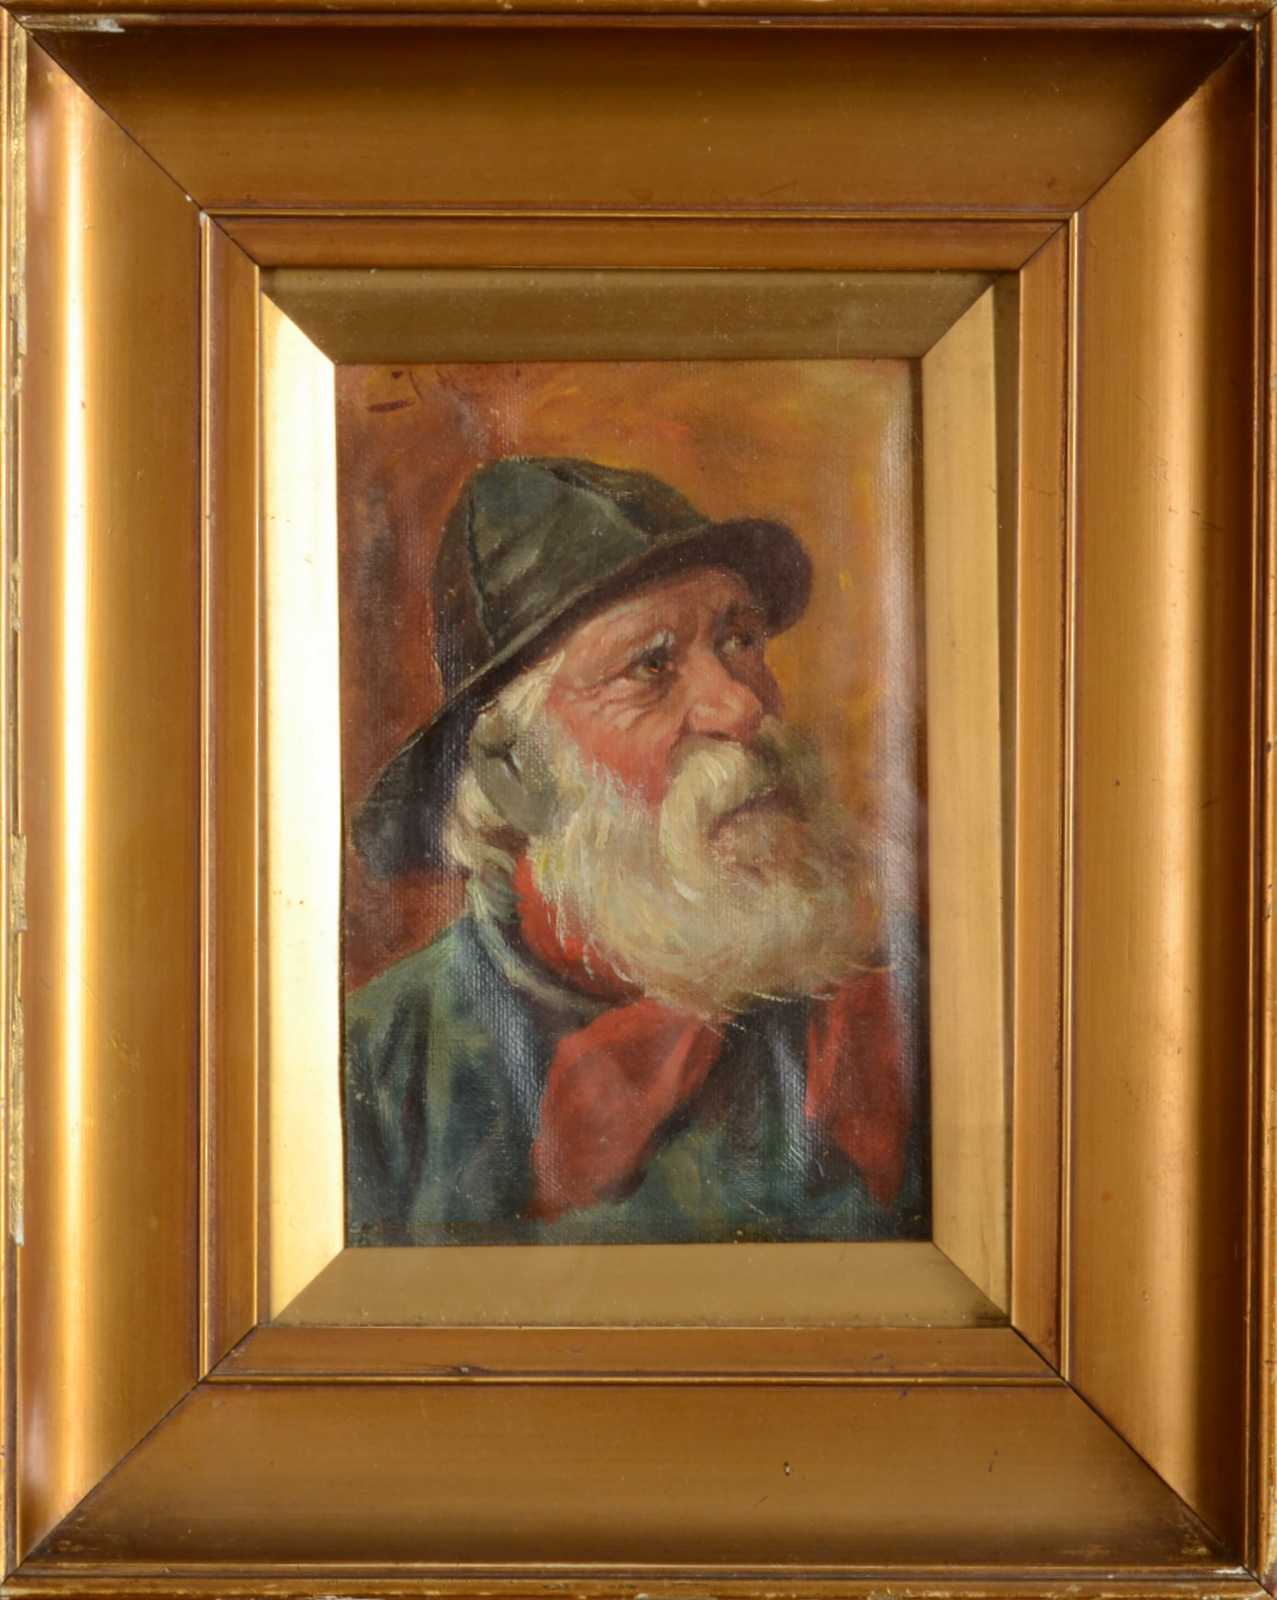 Portrait of a Fisherman Oil on canvas Indistinctly signed 16 x 11 cm - Image 2 of 3